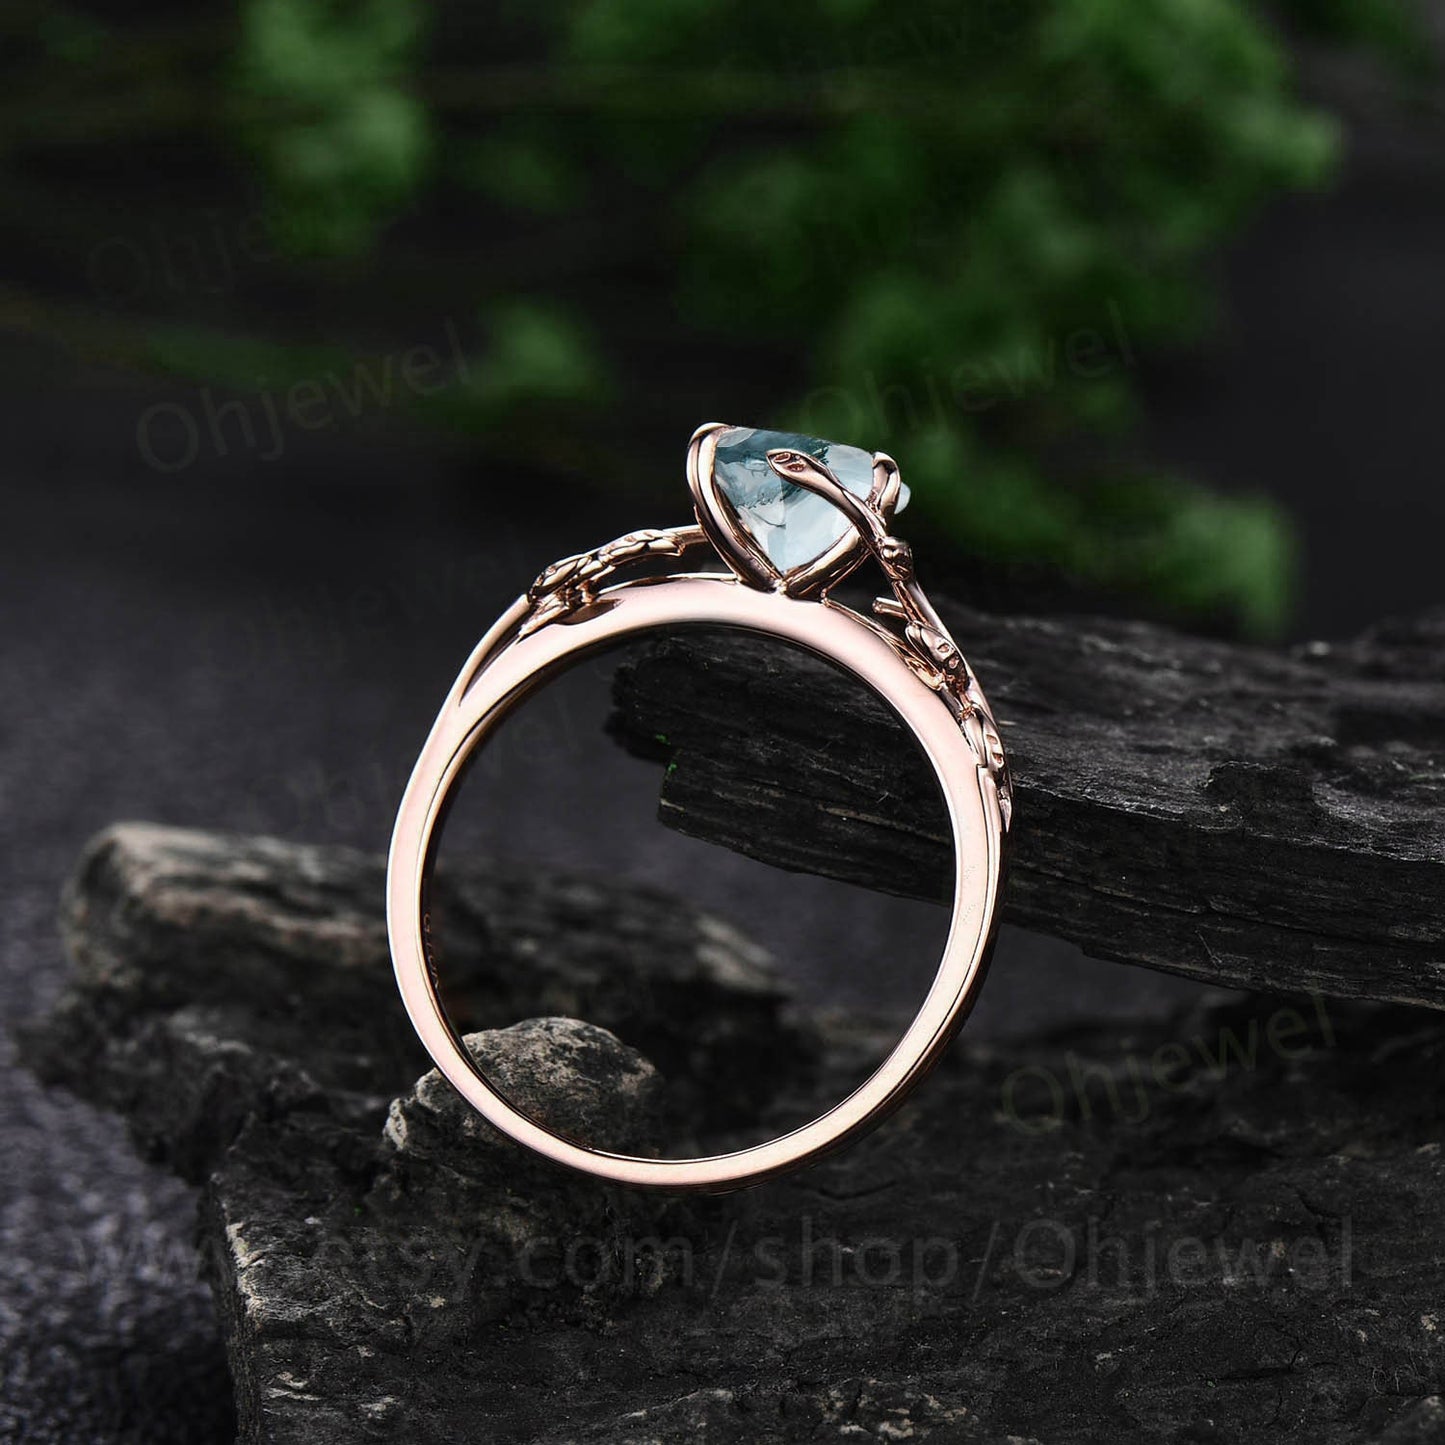 Heart shaped moss agate engagement ring leaf flower rose gold silver unique vintage solitaire engagement ring promise wedding ring for women